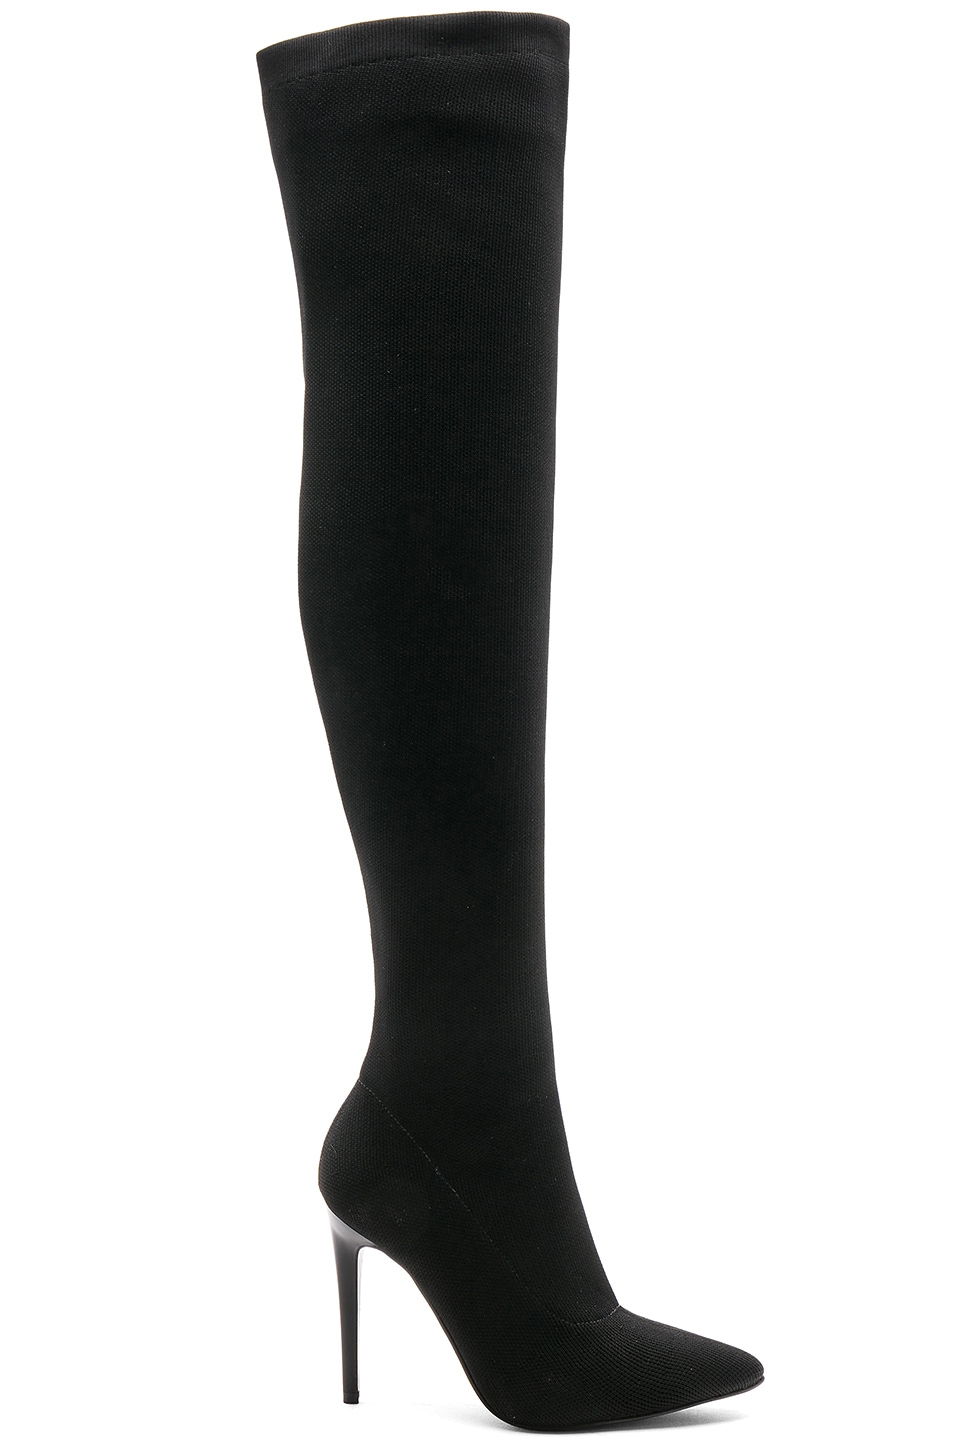 KENDALL + KYLIE Anabel Boot in Black Knit | REVOLVE